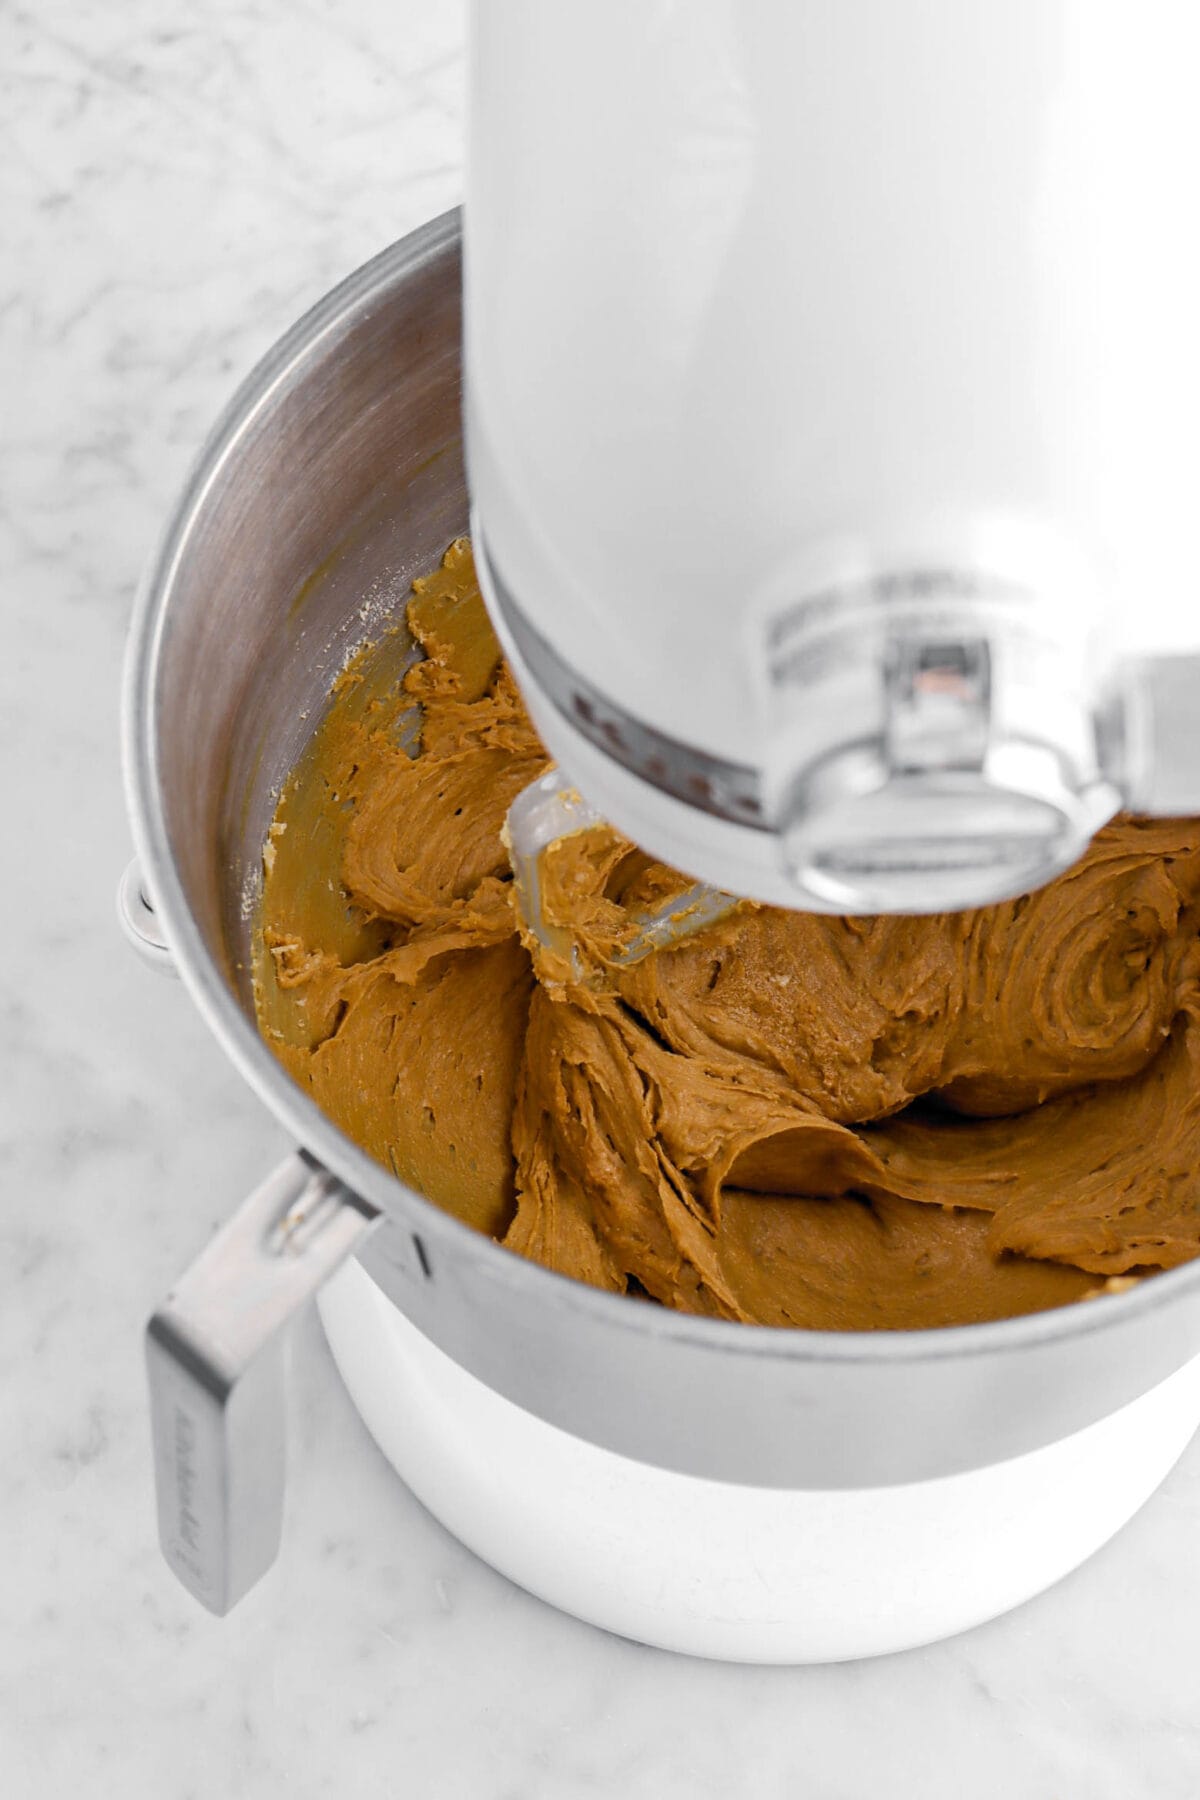 soft molasses cookie dough in stand mixer.